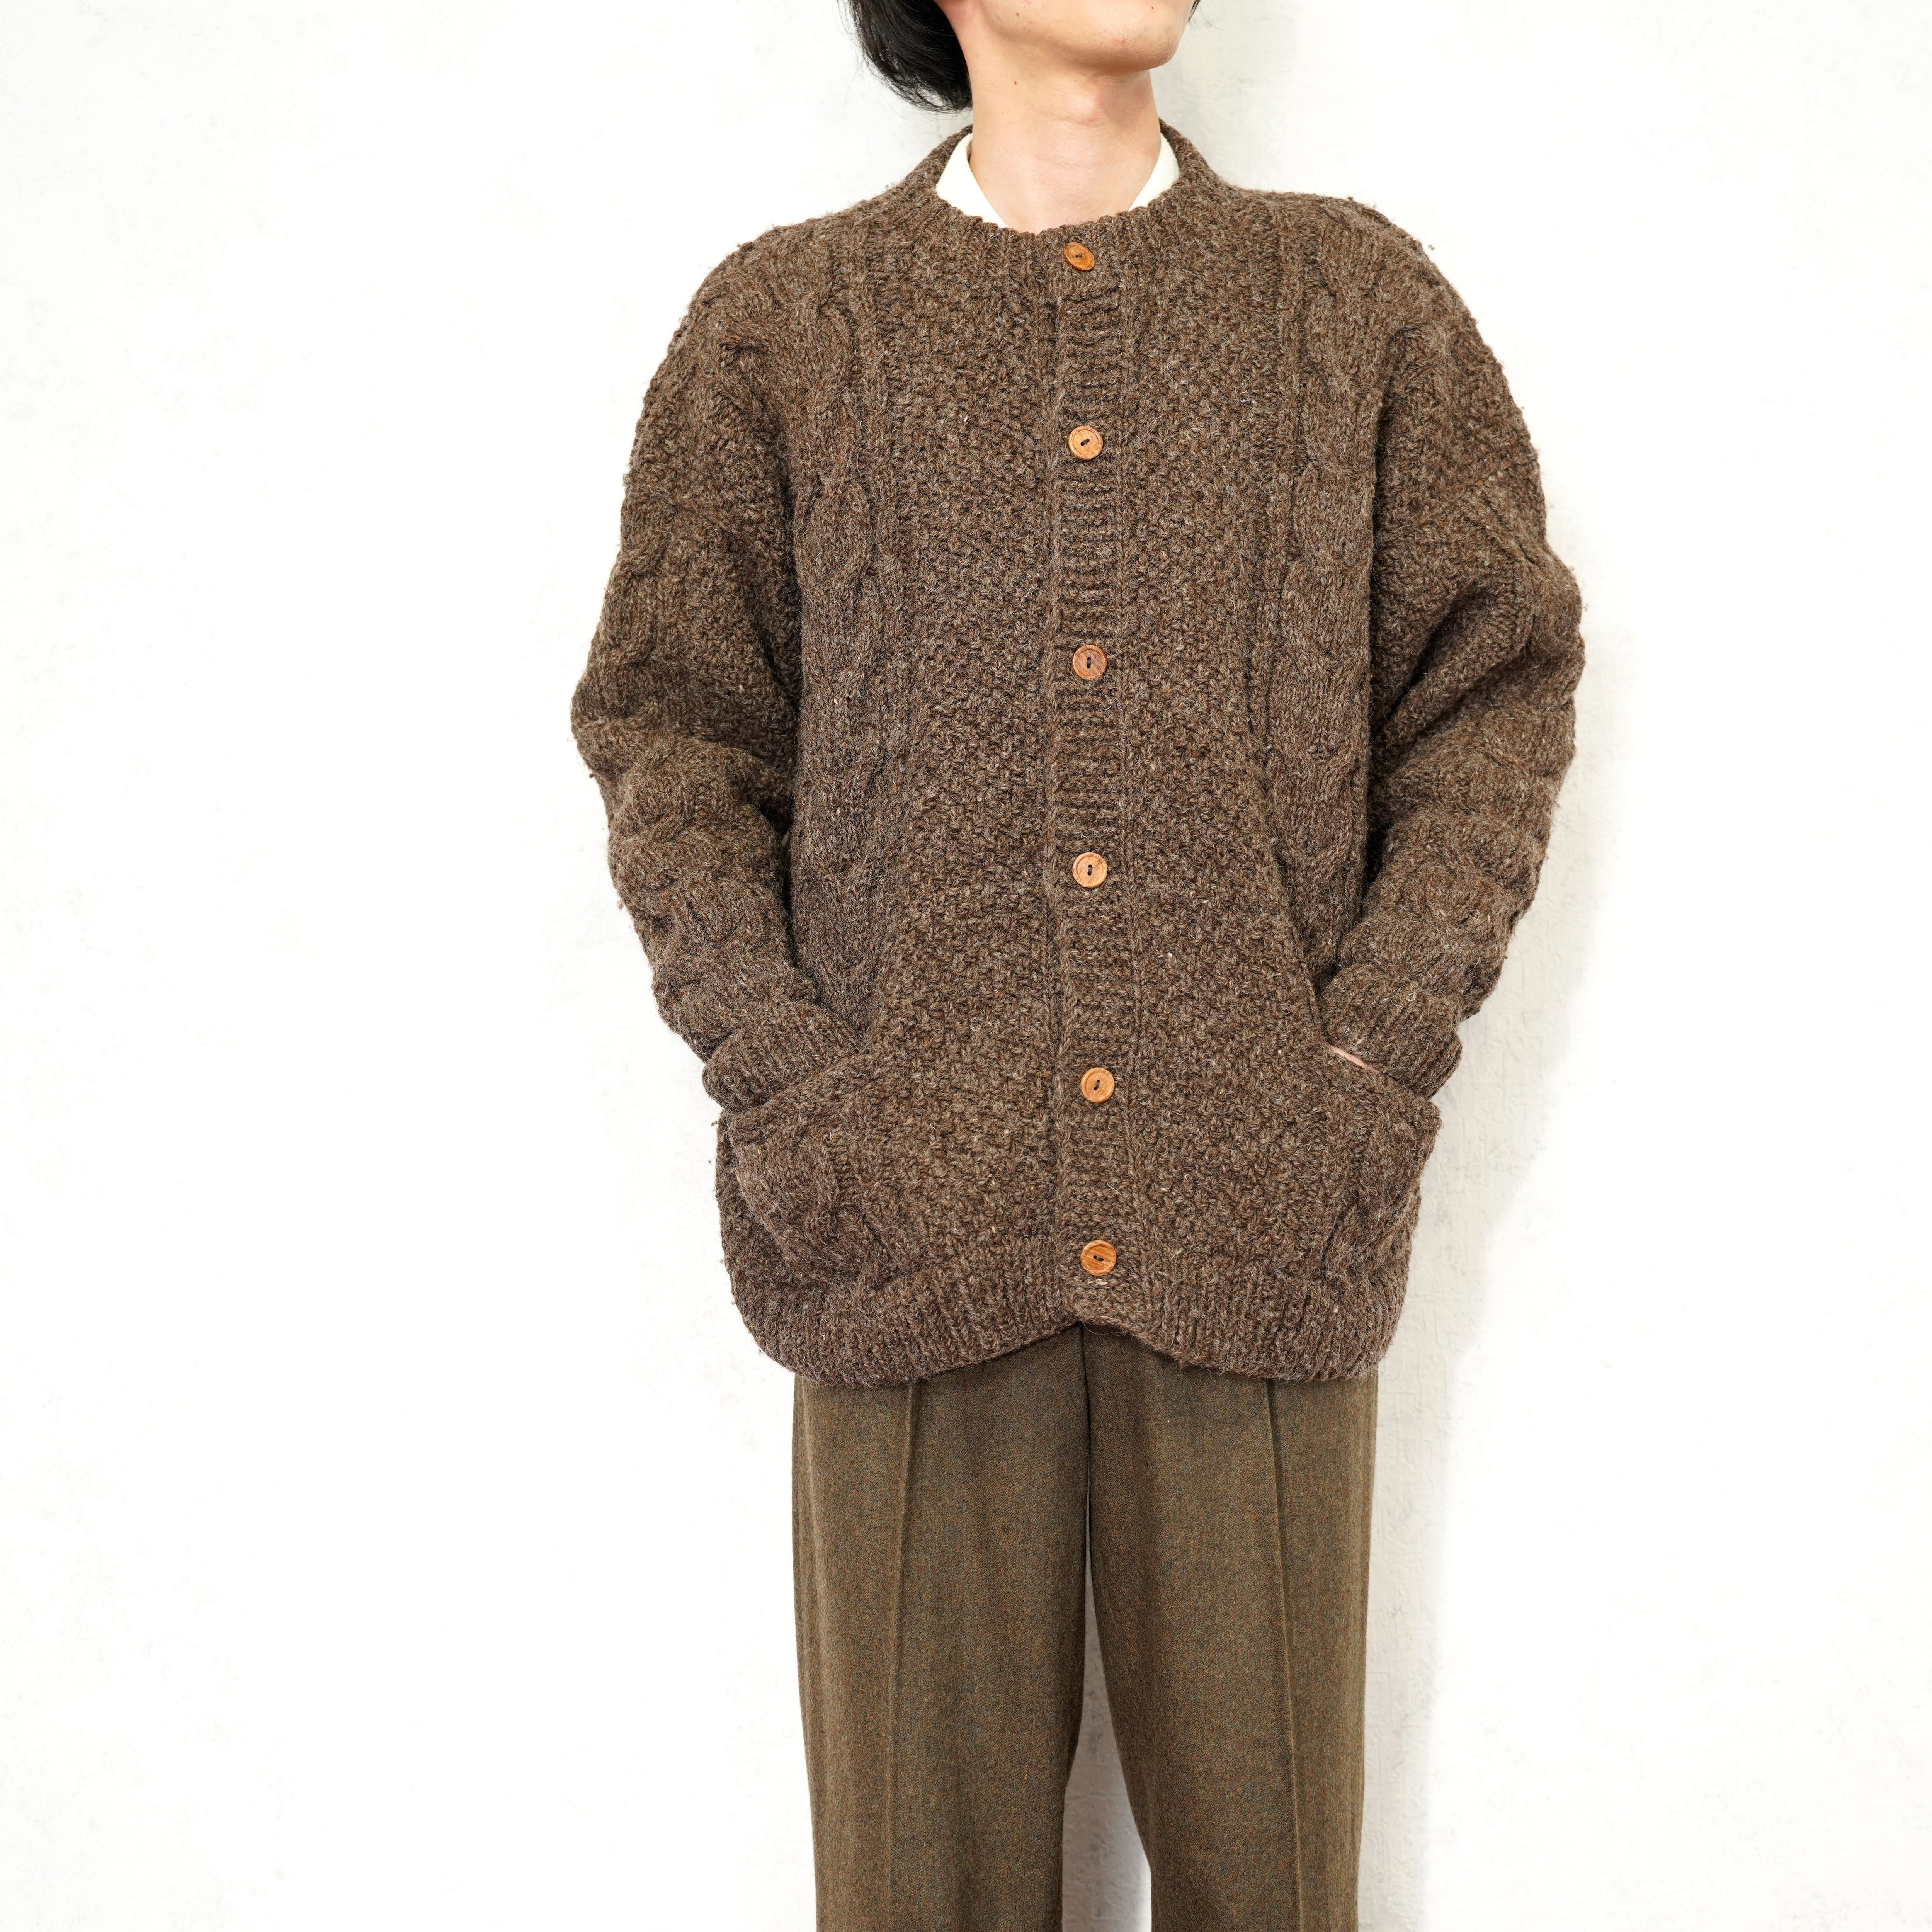 EU VINTAGE CABLE DESIGN KNIT CARDIGAN MADE IN NEPAL/ヨーロッパ古着